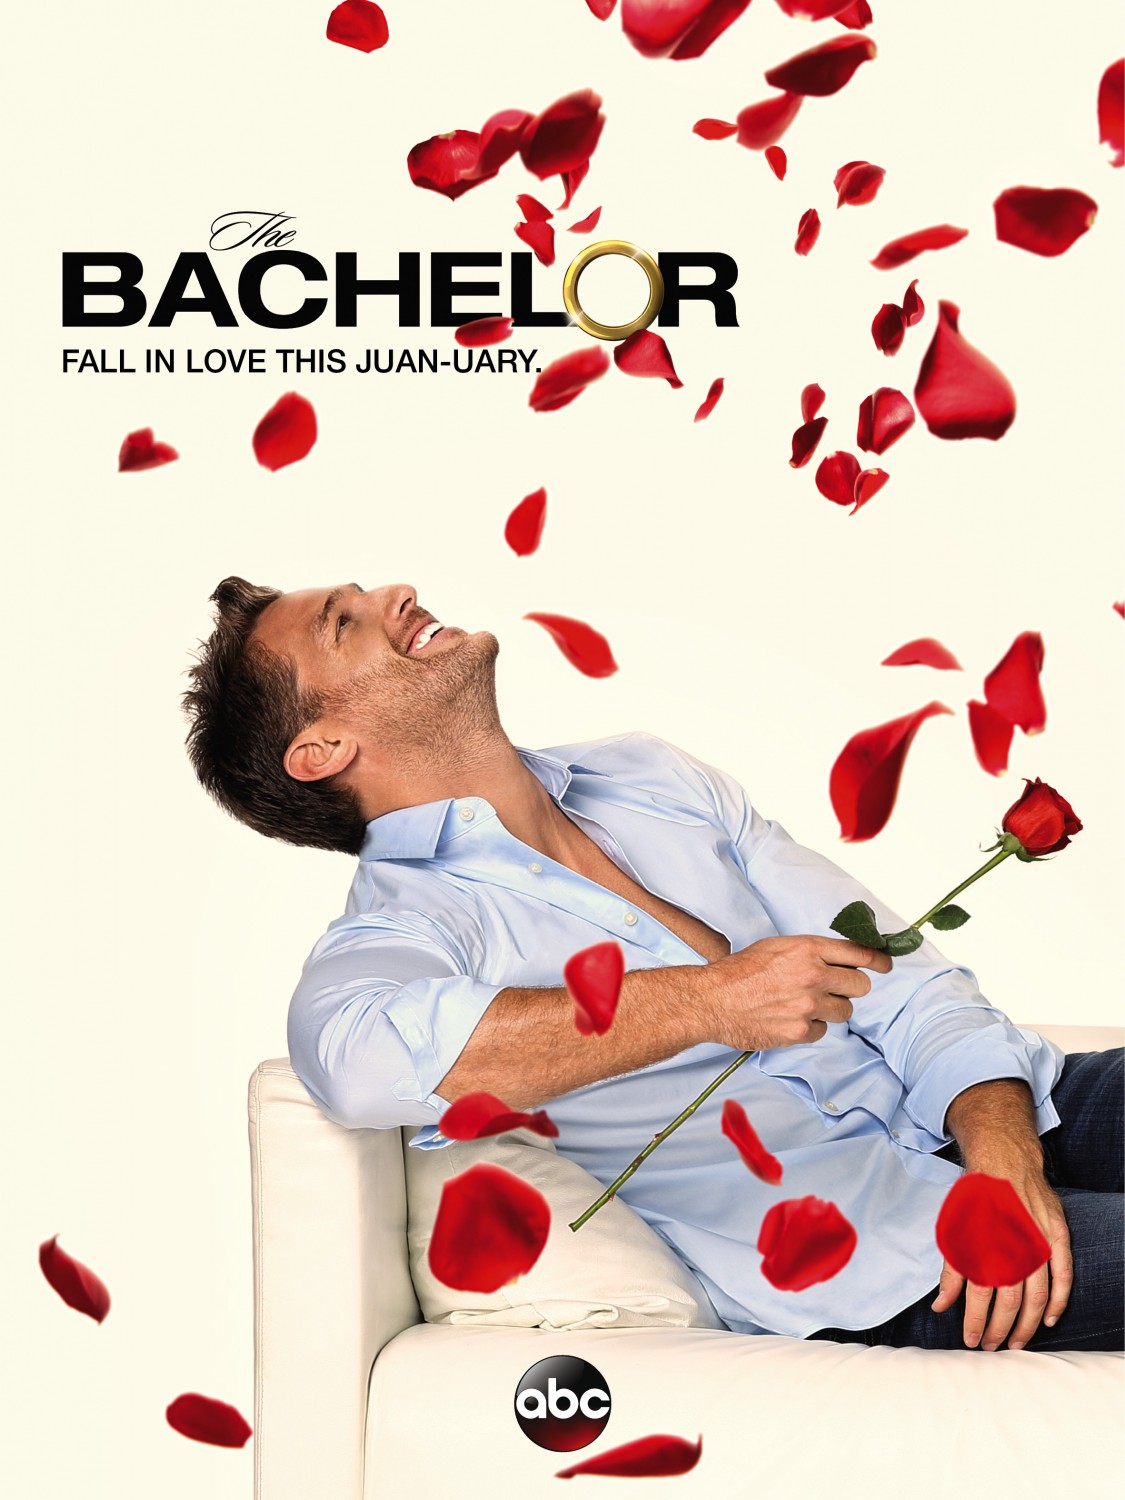 Extra Large TV Poster Image for The Bachelor (#4 of 11)